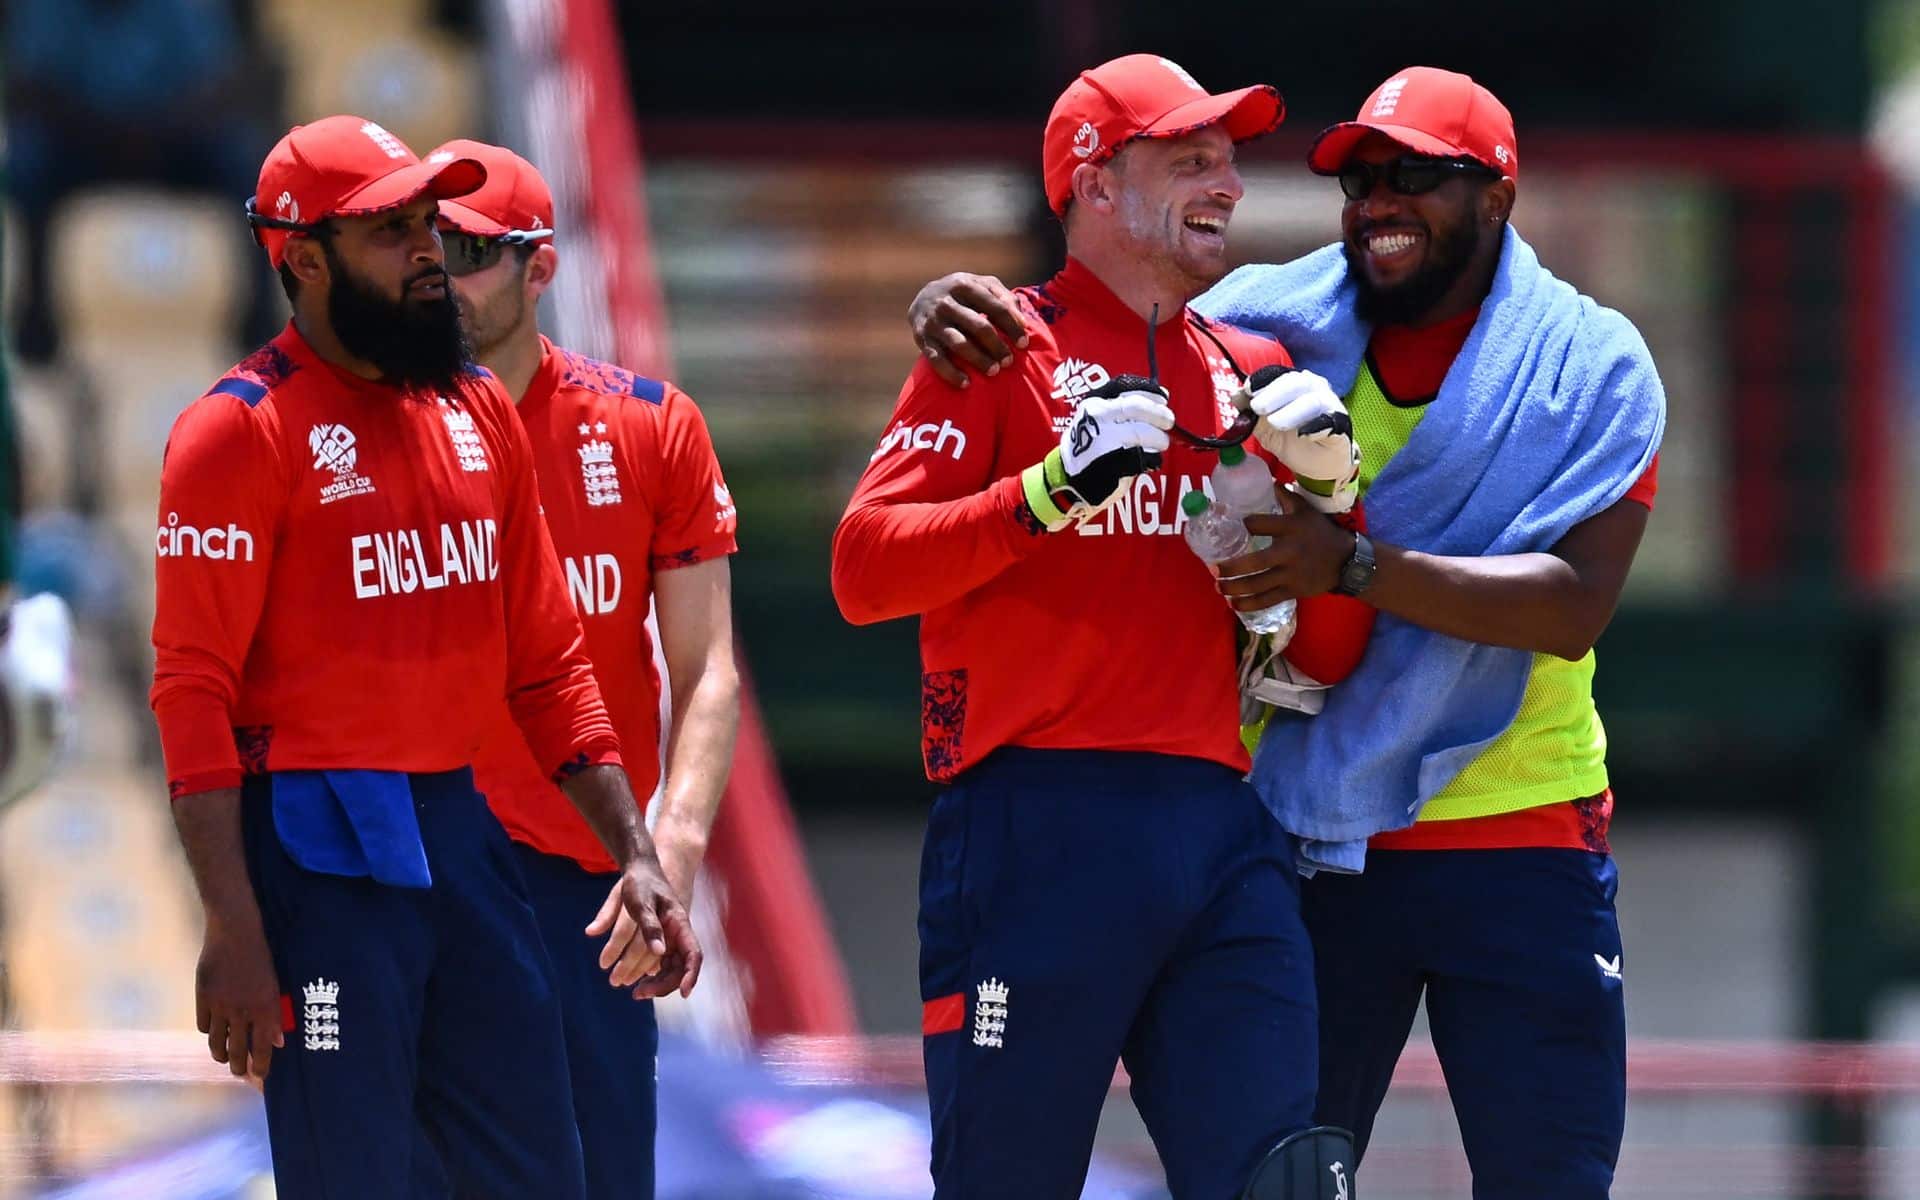 Any Place For Wood & Jacks Against India? Check Out England's Probable XI for T20 World Cup Semi-Finals